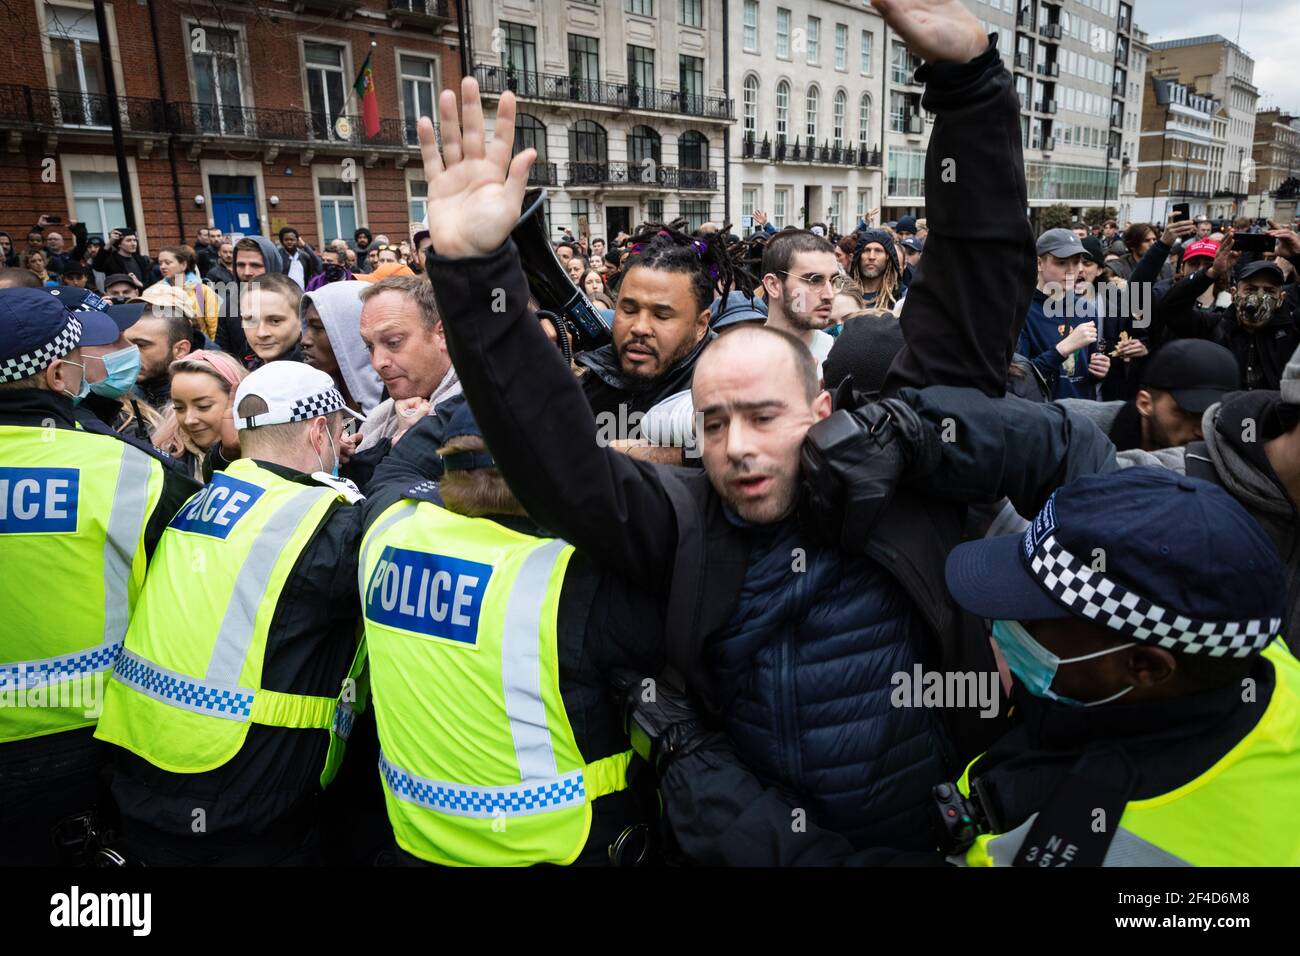 London, UK. 20th Mar, 2021. A protester is caught up in scuffles between the MET police and protesters who were taking part in a anti-lockdown march. A World Wide Rally For Freedom is organised a year after lockdowns were introduced. Credit: Andy Barton/Alamy Live News Stock Photo